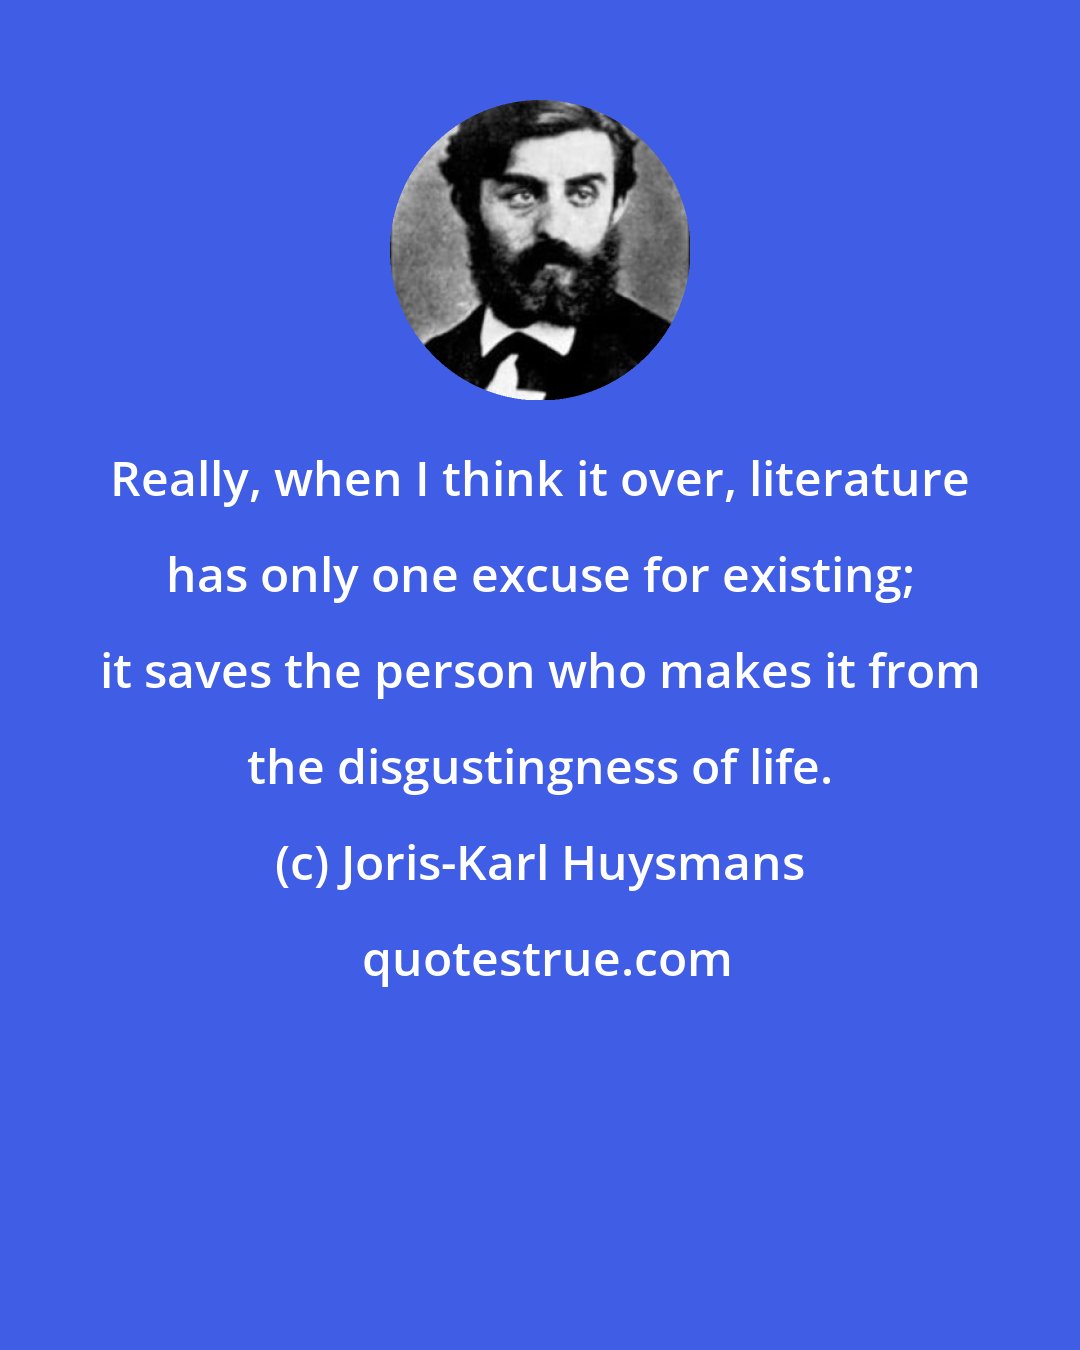 Joris-Karl Huysmans: Really, when I think it over, literature has only one excuse for existing; it saves the person who makes it from the disgustingness of life.